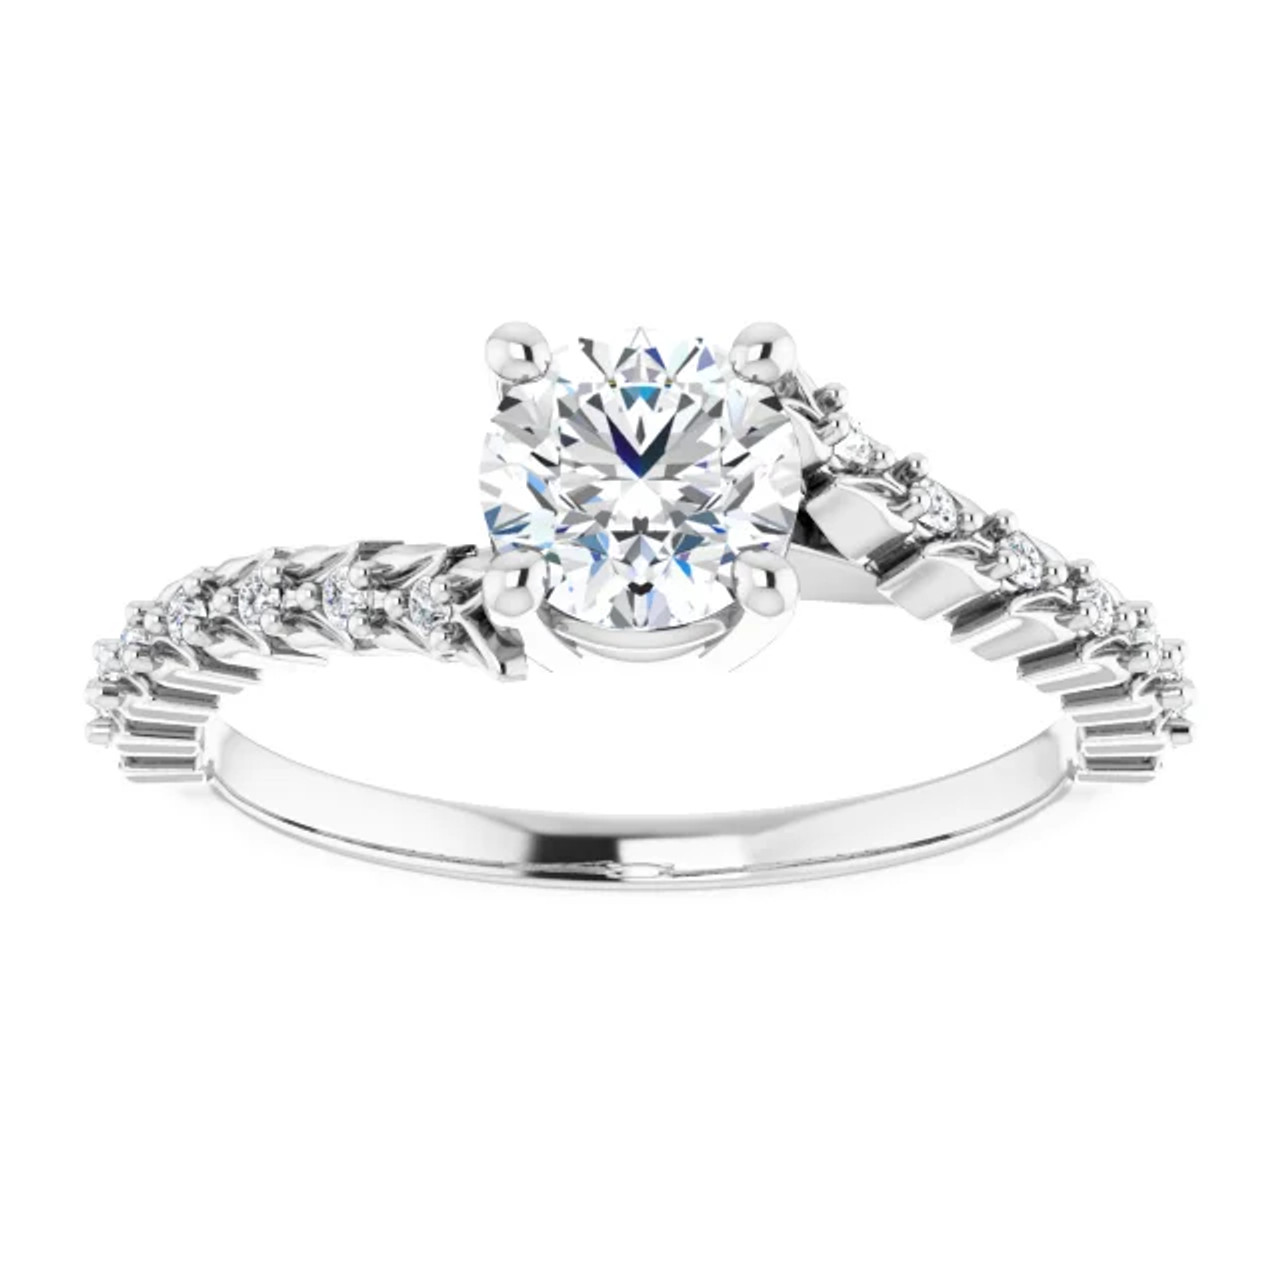 Marley Nature-Inspired Bypass Engagement Ring Setting | Gage Diamonds